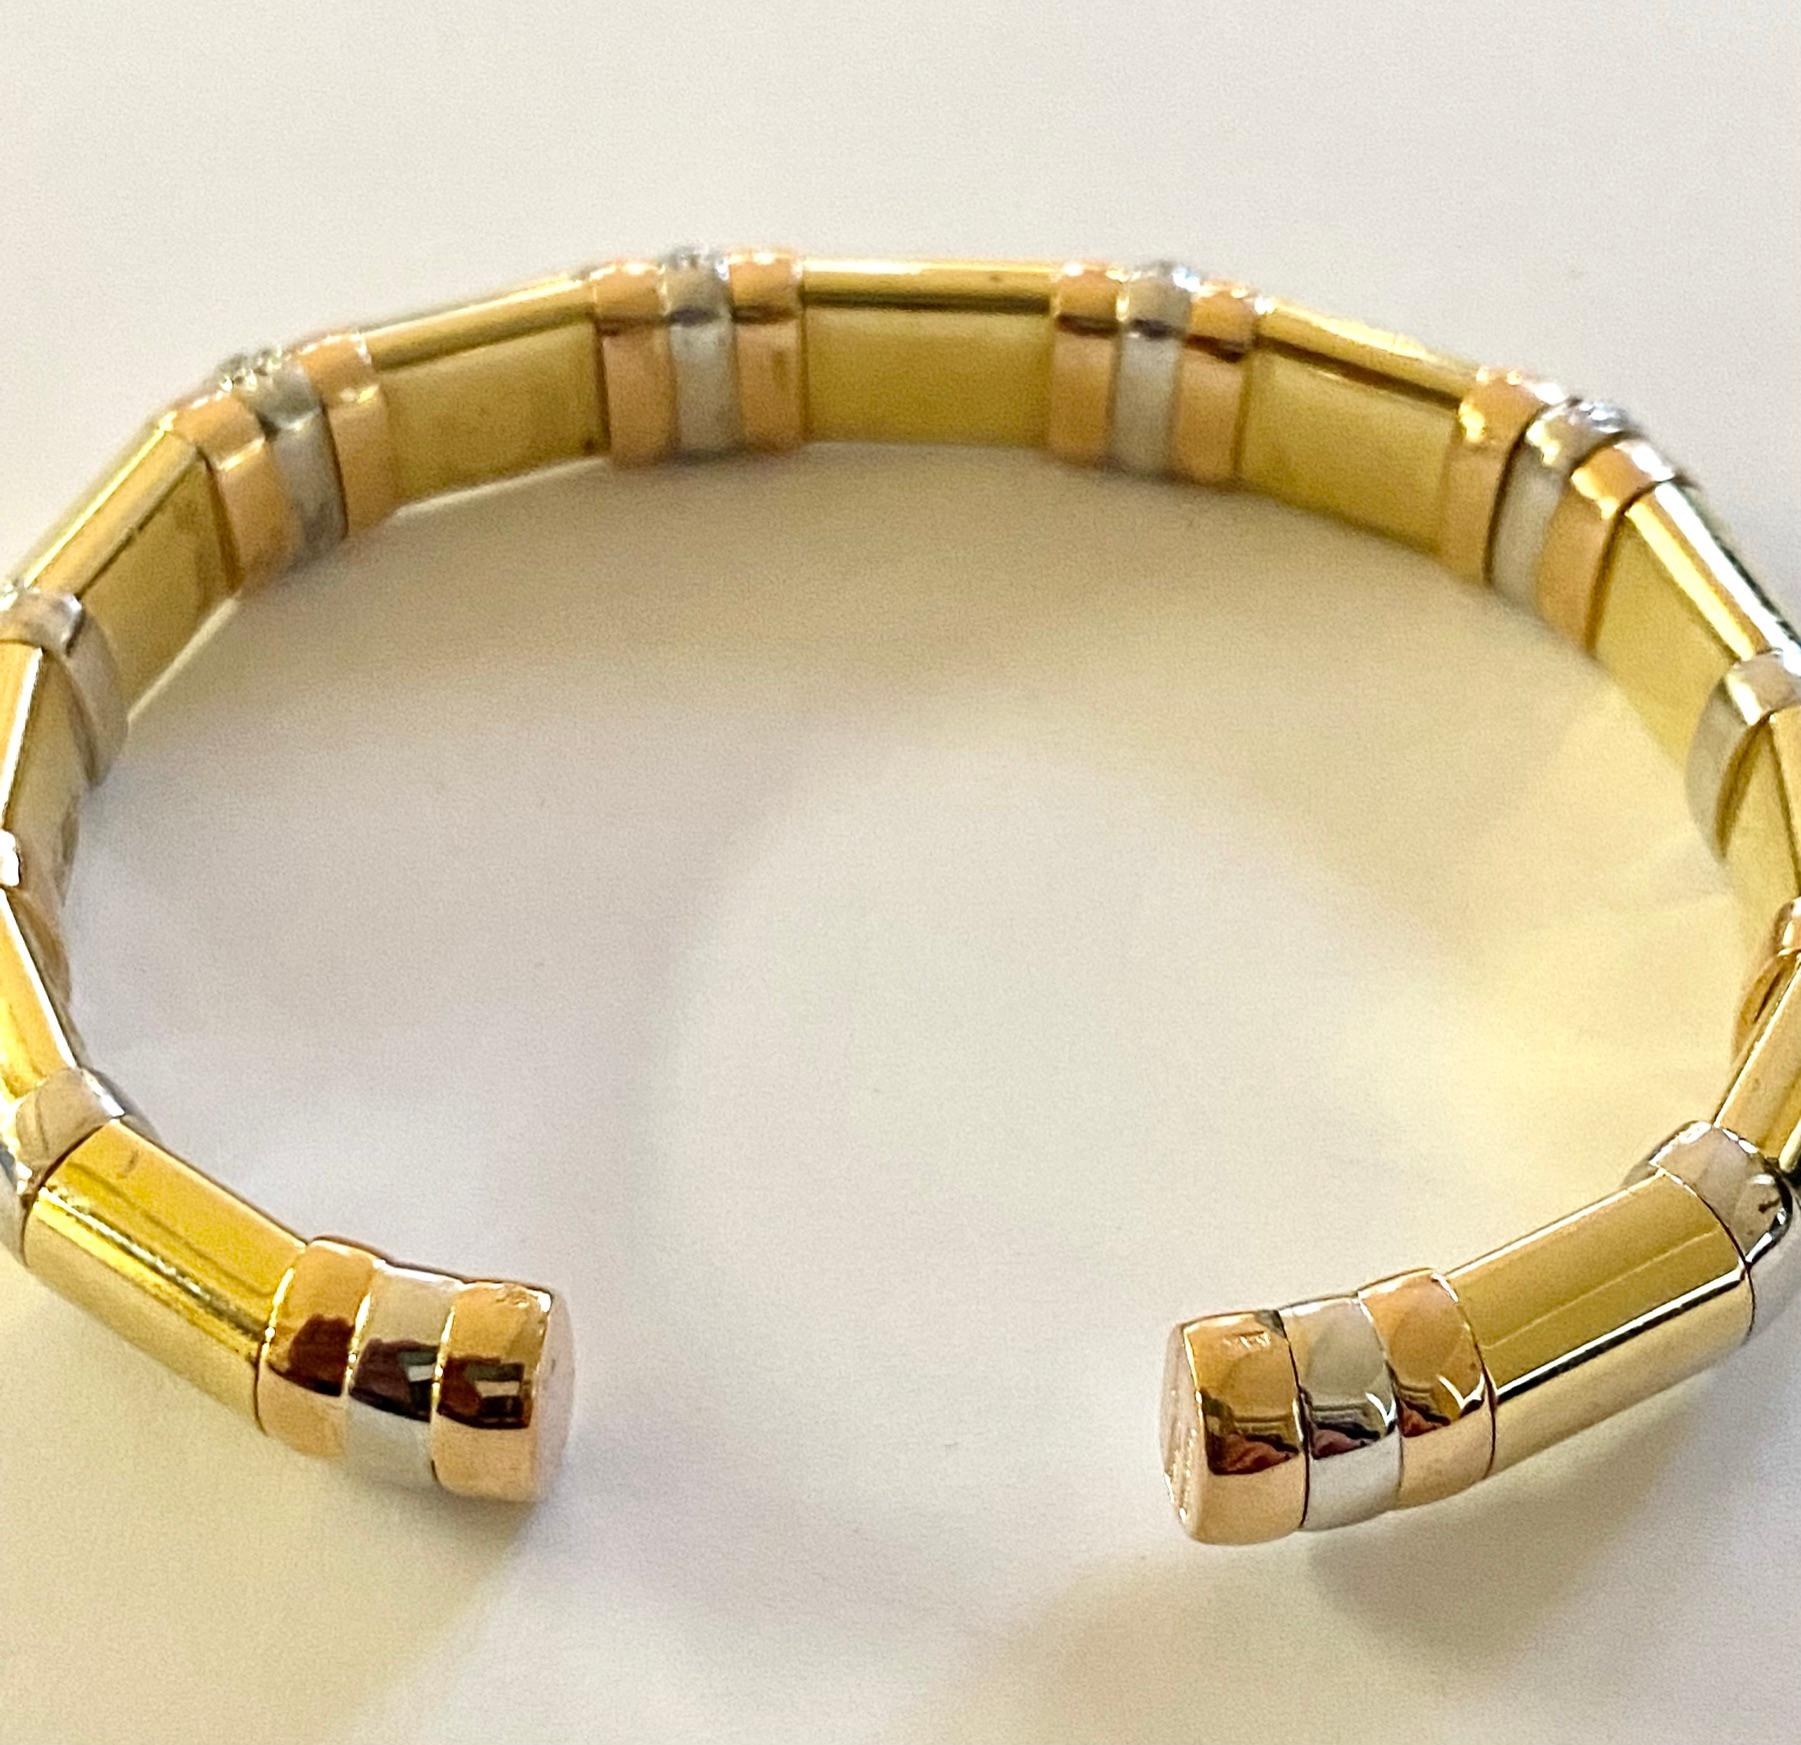 Women's or Men's 18K, Yellow/Red/White Gold Rigid Bracelet with a Silver Core, Signed Cesari 1995